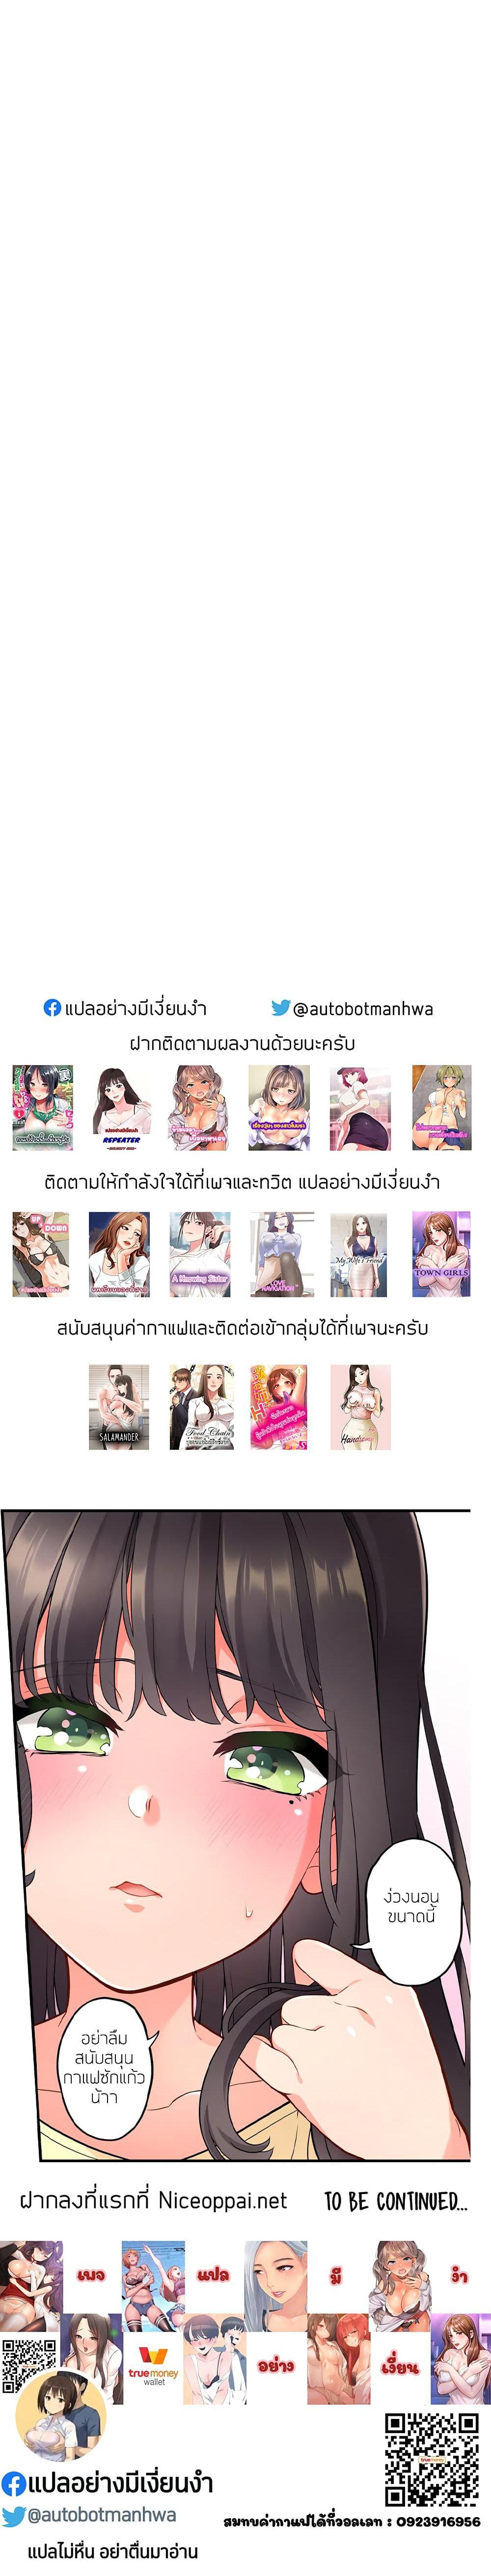 A Knowing Sister 12 ภาพ 29